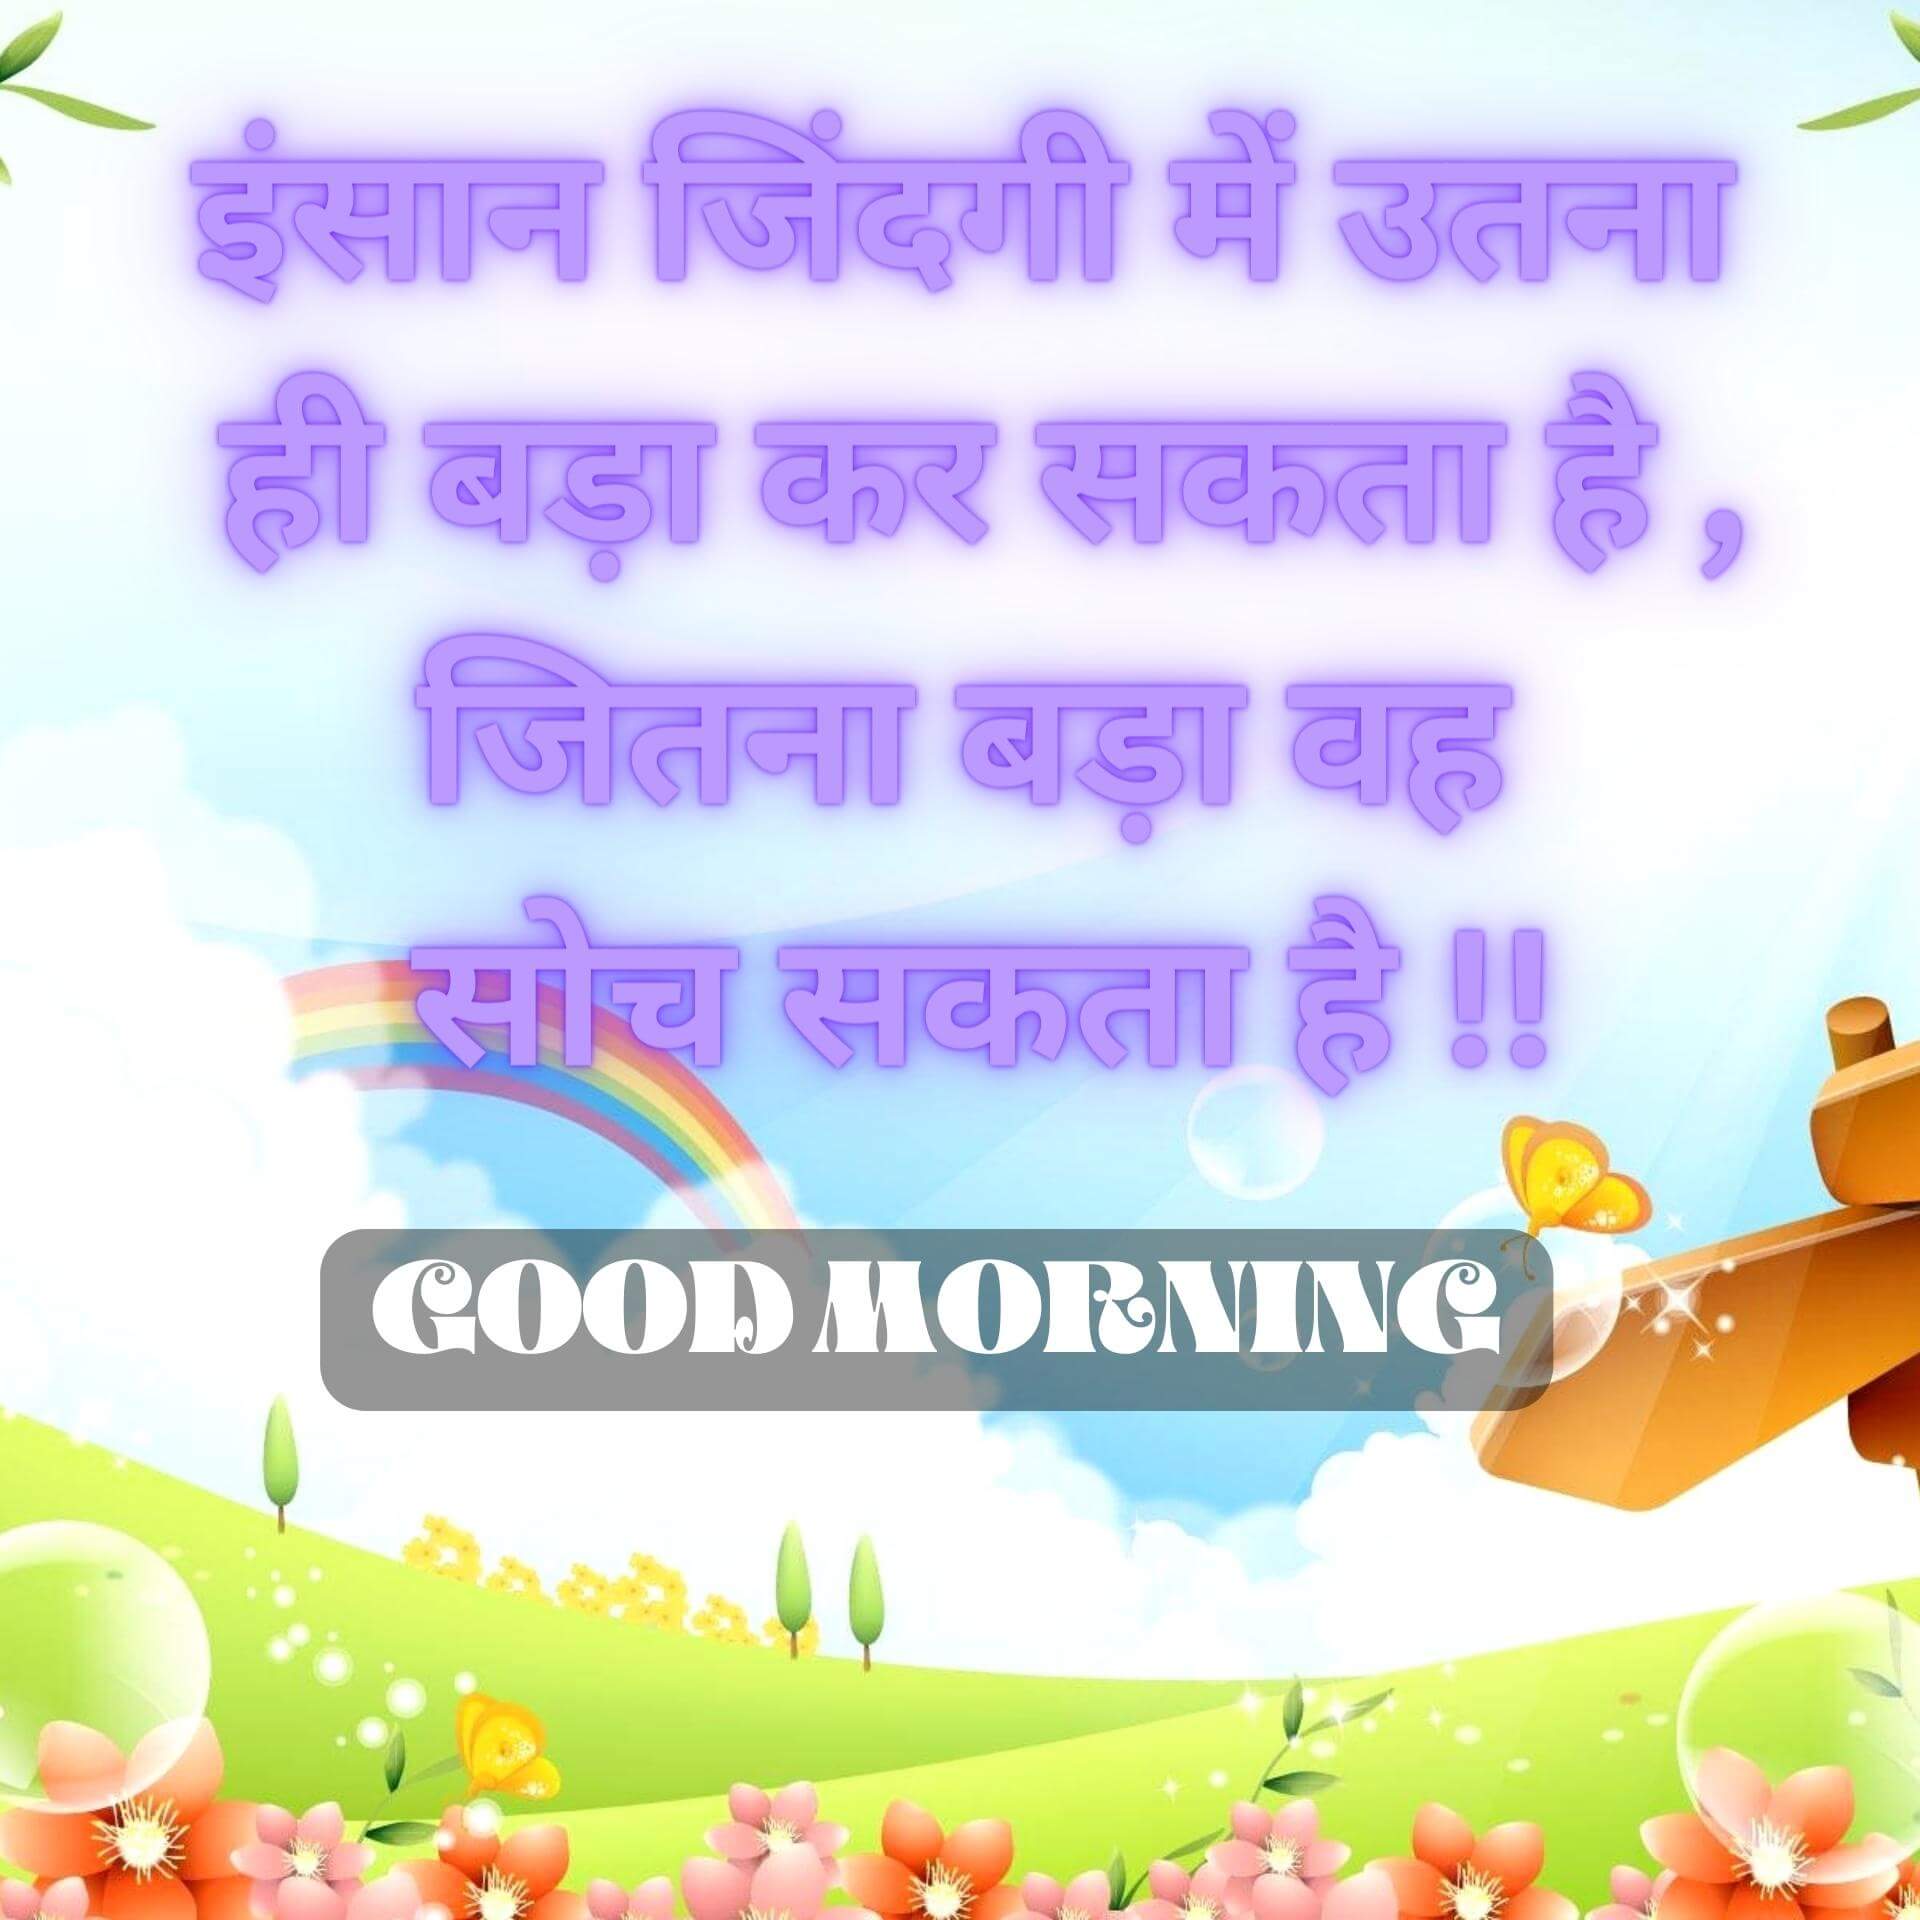 Good Morning Images With Hindi Quotes Pics Free New 2023